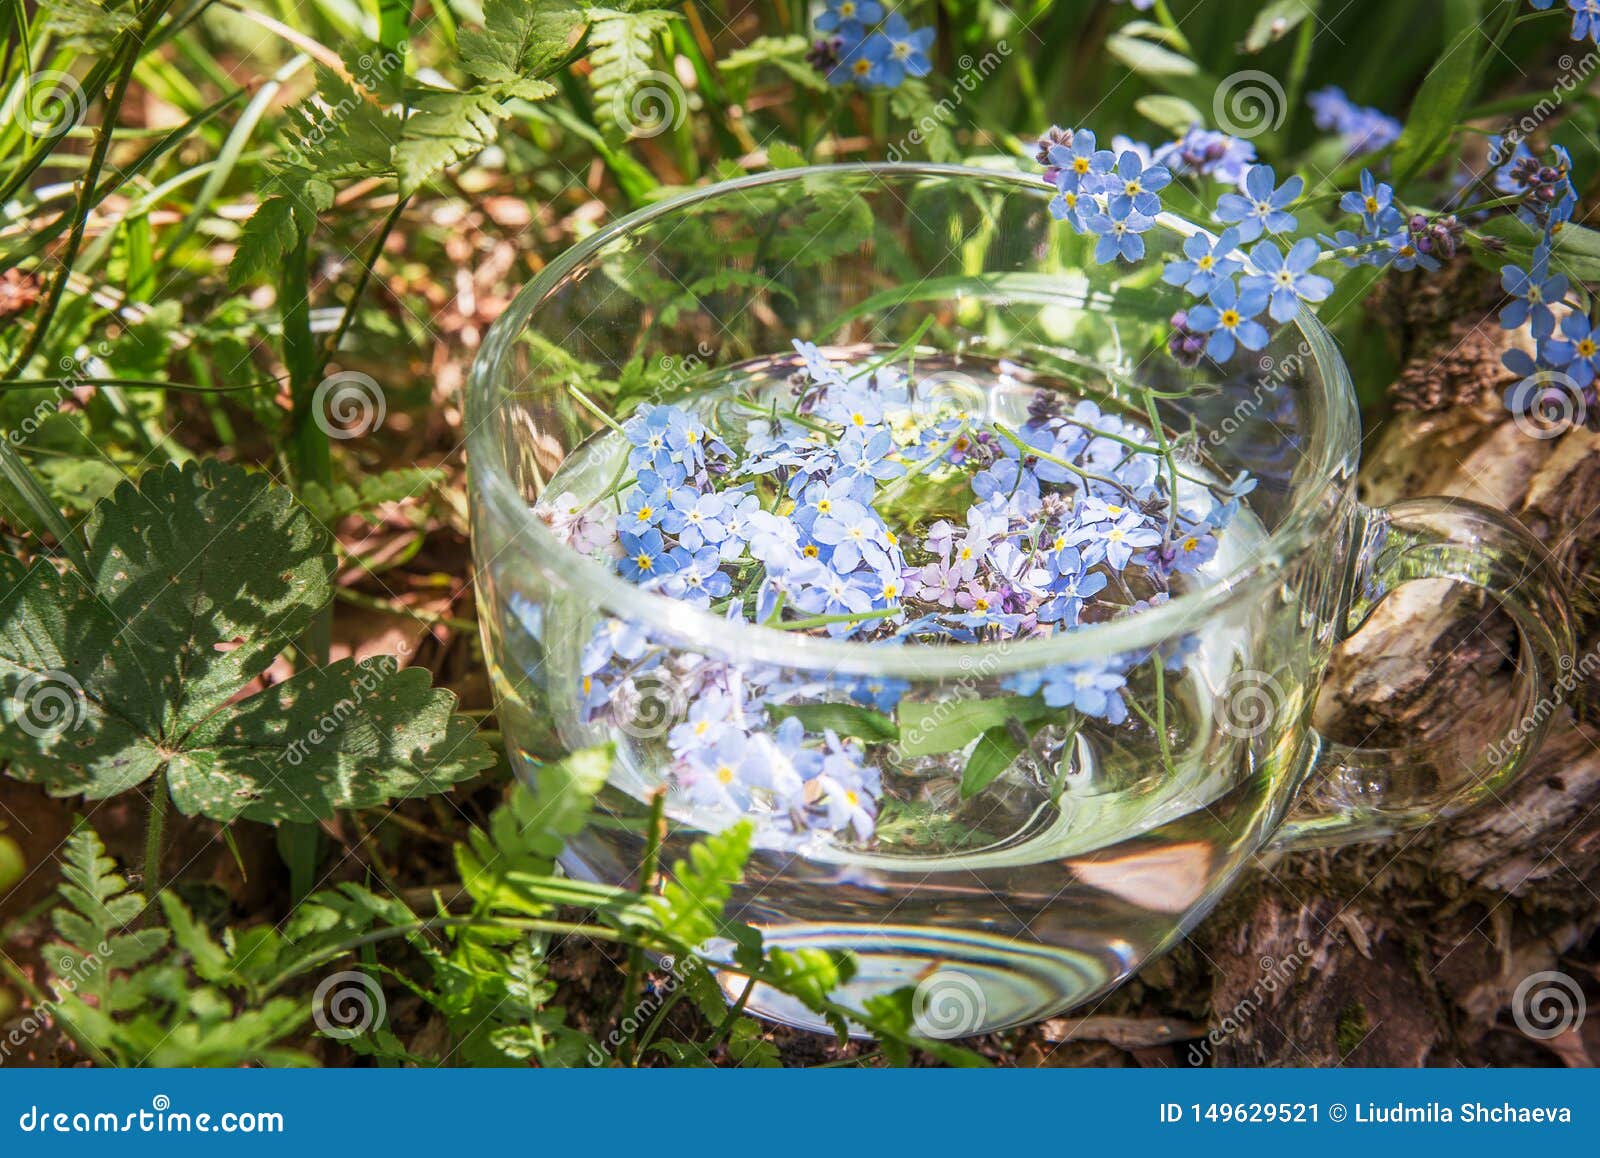 relax tea with an officinal grass of forget-me-not in a transparent cup on a wooden stub, in the moss-grown summer sunny day